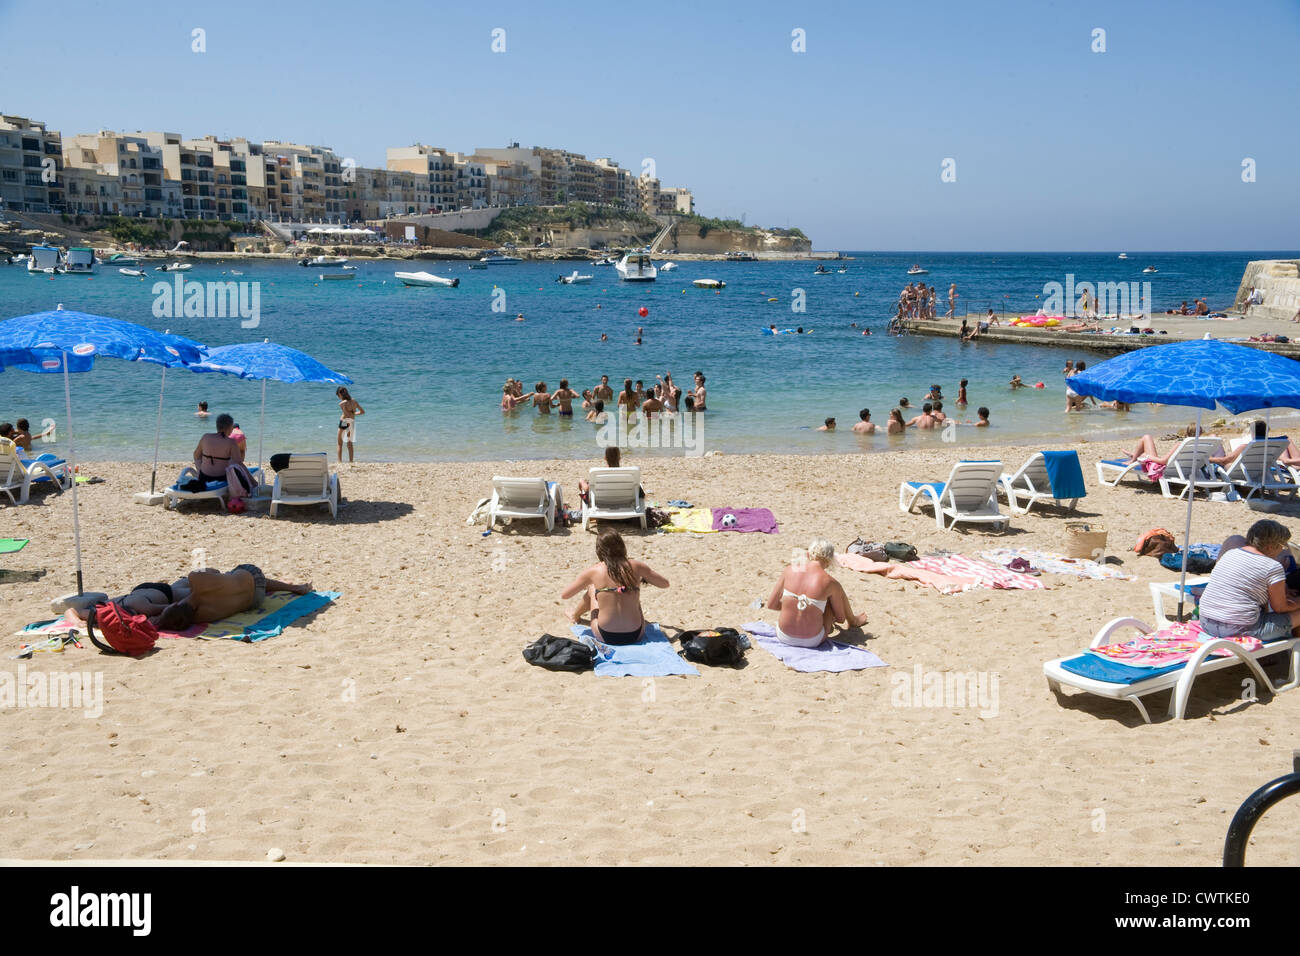 Locals and tourists on the beach at Marsalforn on the Maltese island of Gozo. Stock Photo